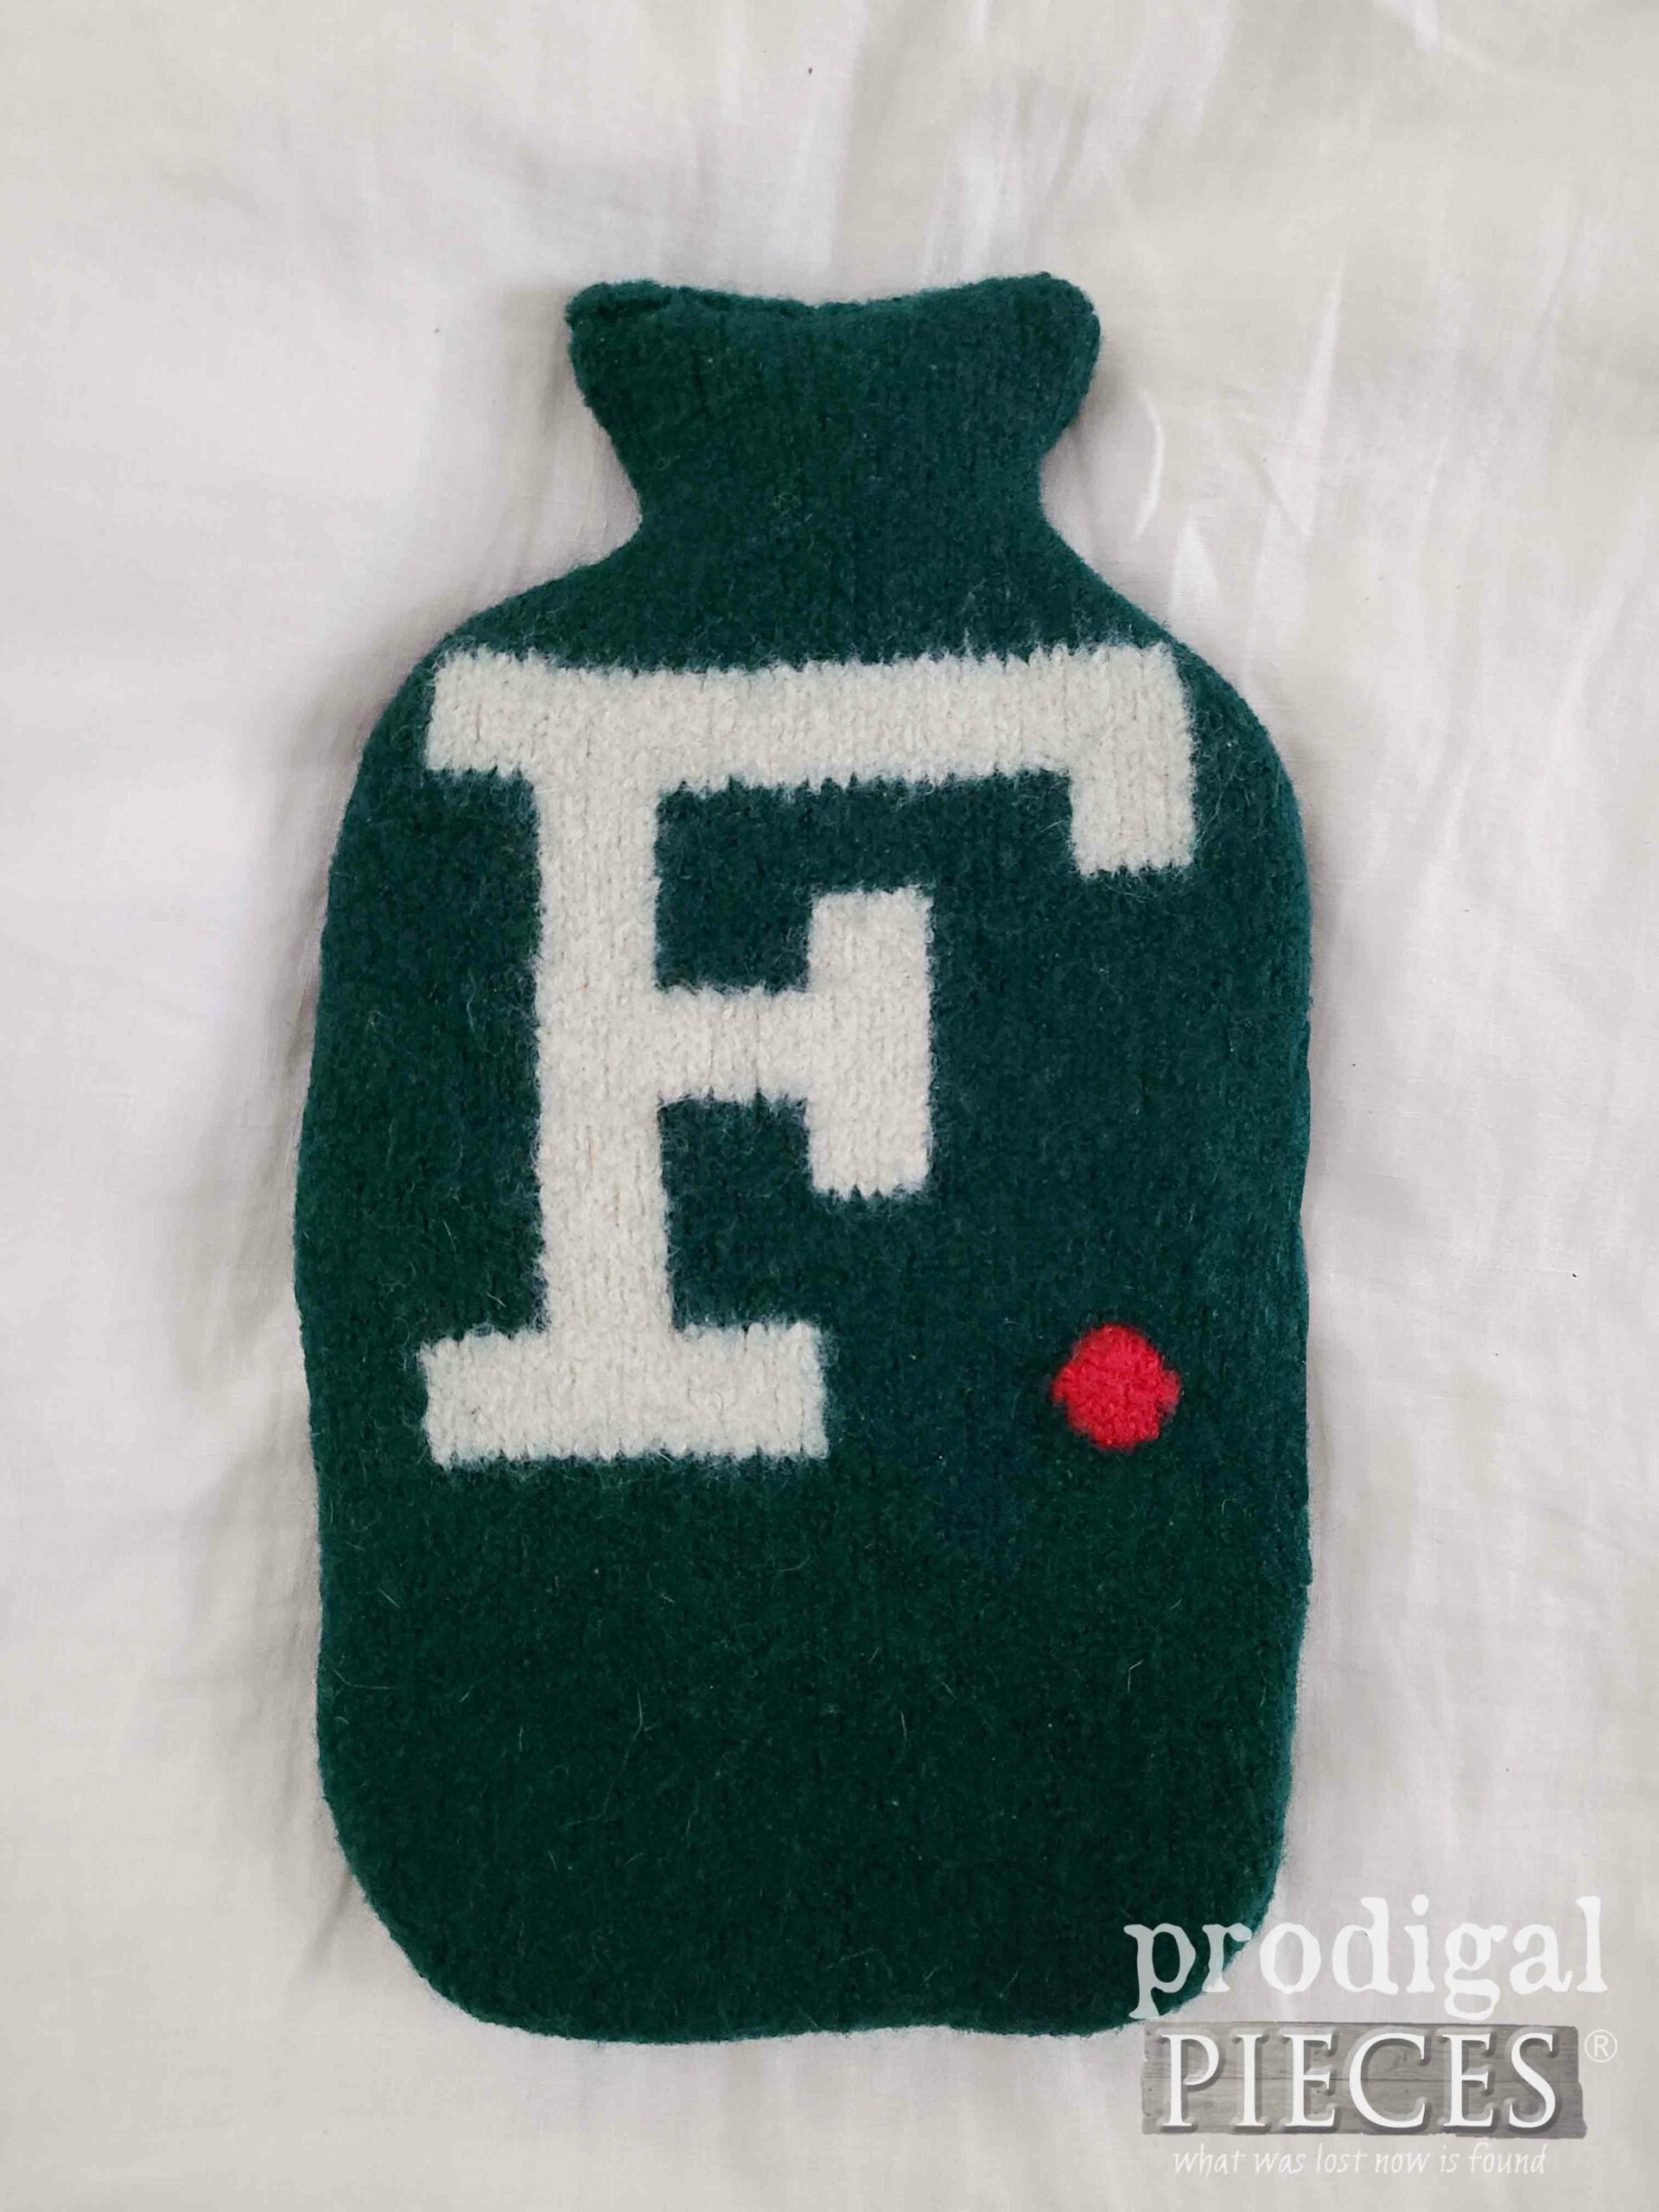 Handmade Felted Wool Hot Water Bottle Cover from Thrifted Sweater by Larissa of Prodigal Pieces | prodigalpieces.com #prodigalpieces #selfcare #giftidea #handmade